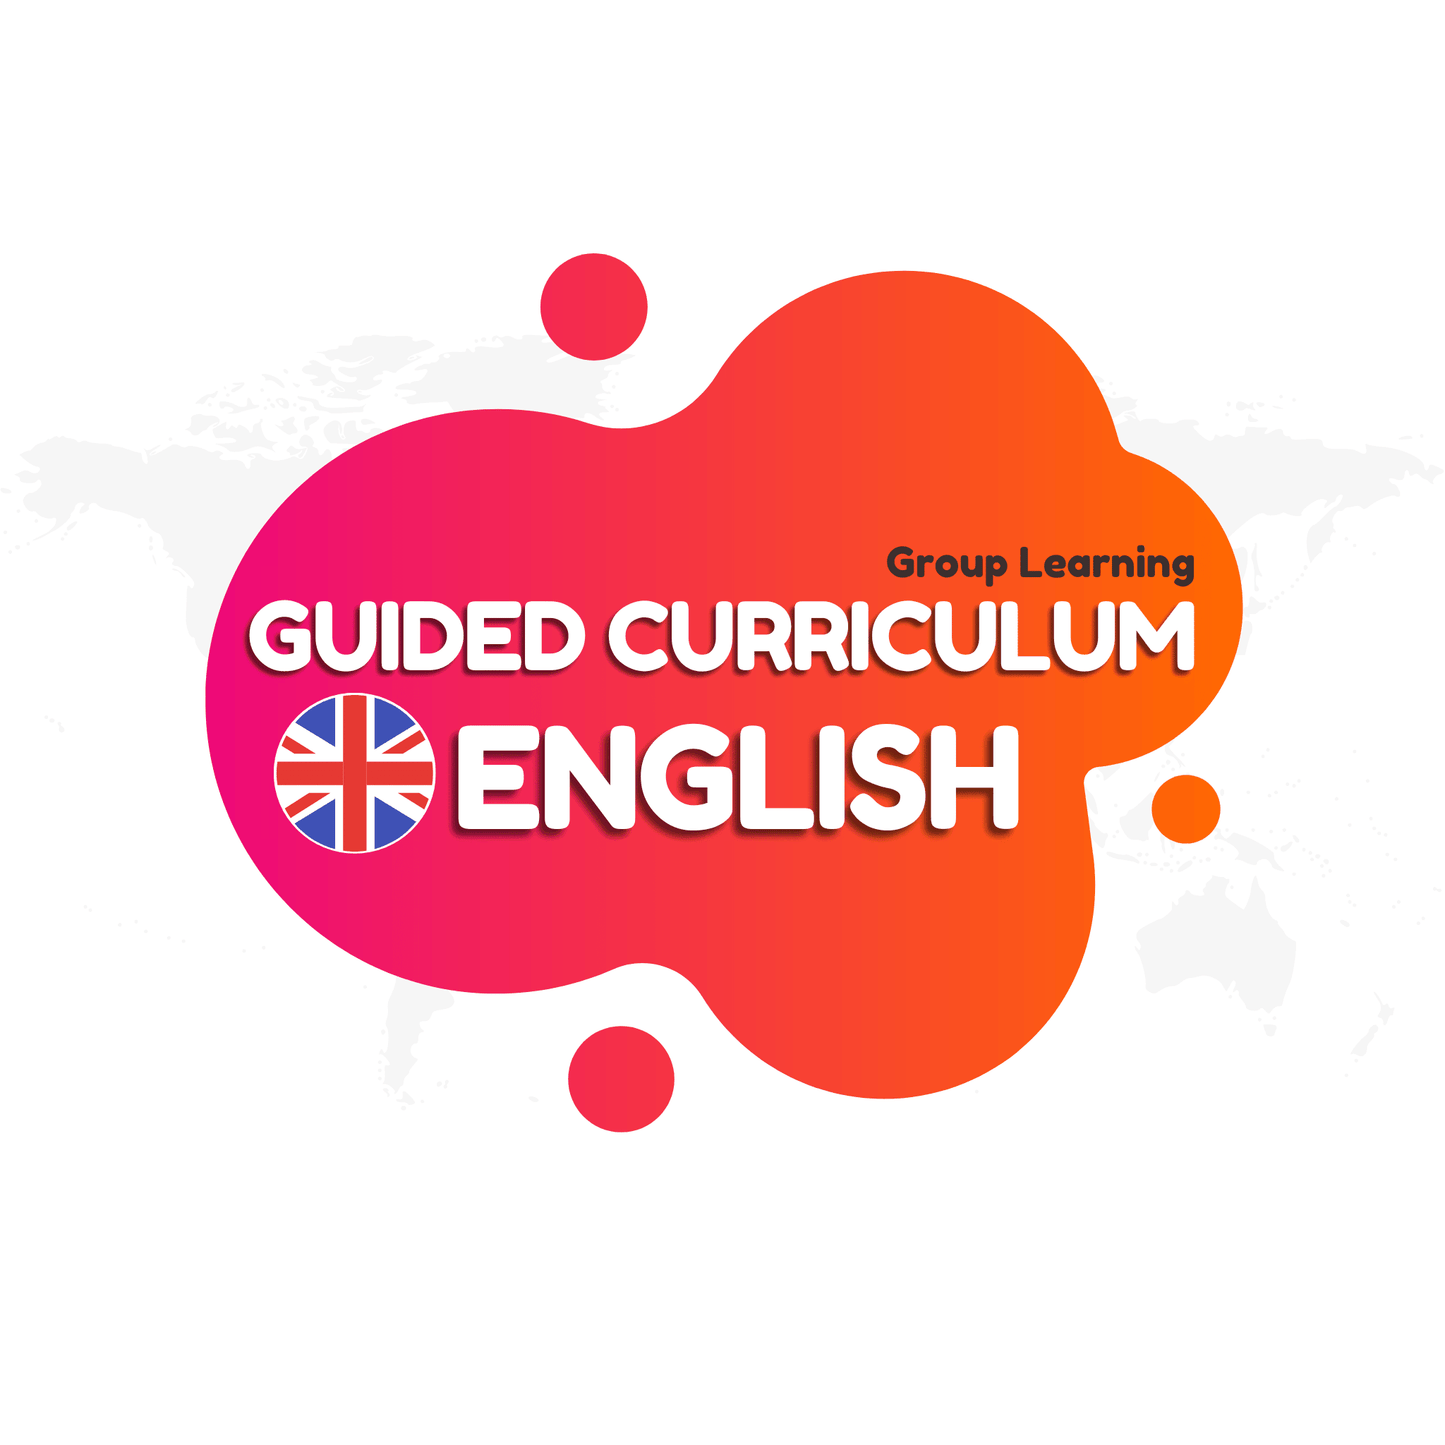 Join Eloquacy’s English curriculum. Progress systematically in group classes at your own pace, mastering every level along the way.